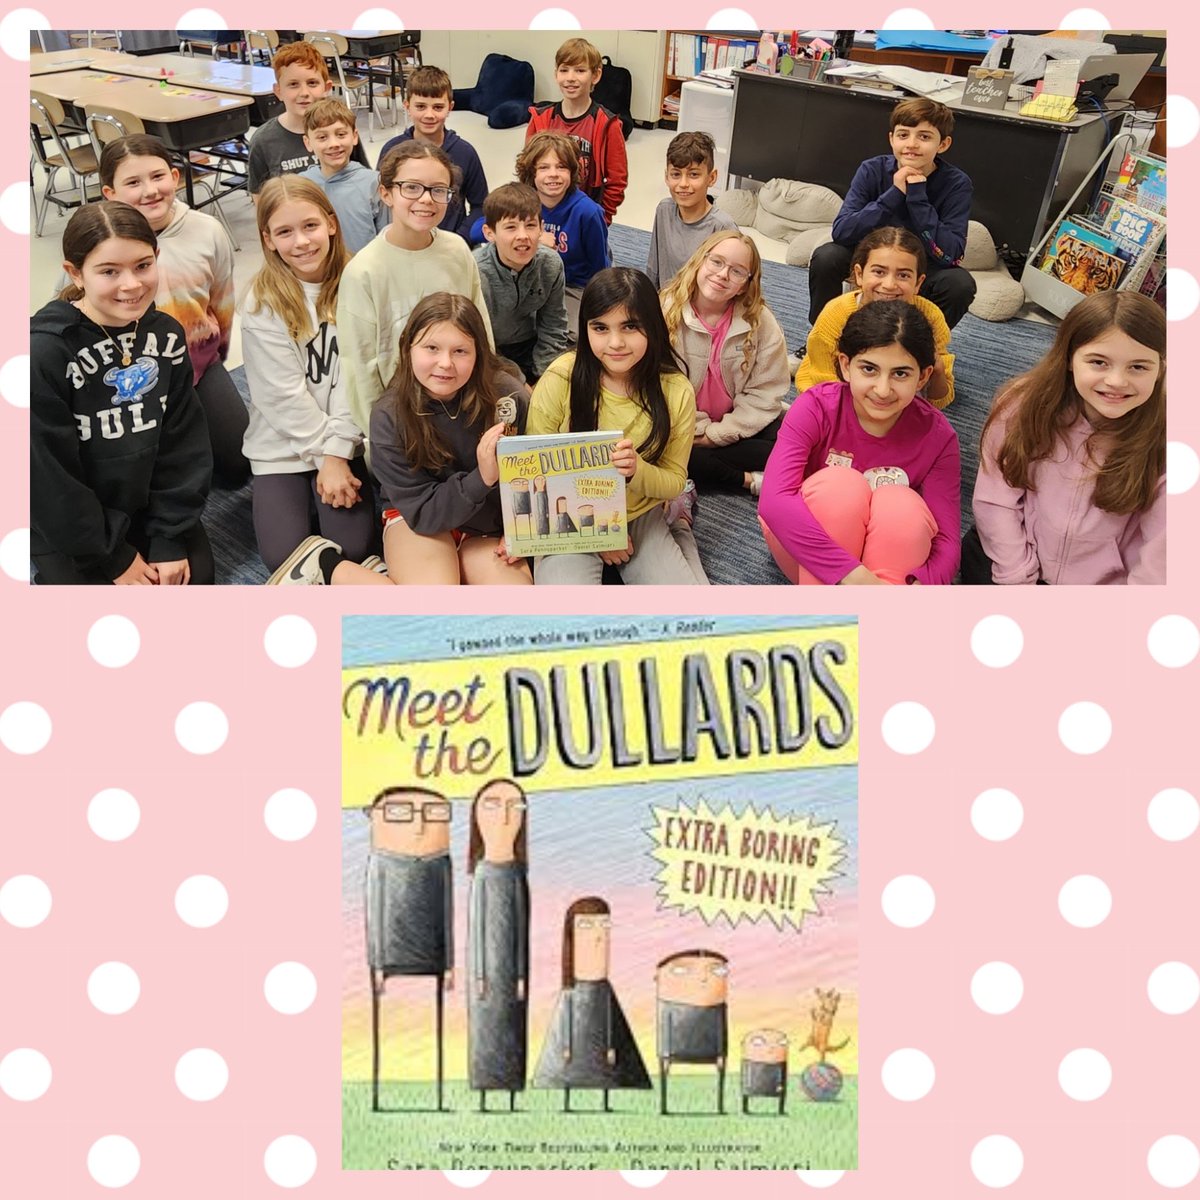 #134/180 April being national humor month was recognized with this (not so) dull book! #ClarenceProud #SheridanHillSharks #classroombookaday